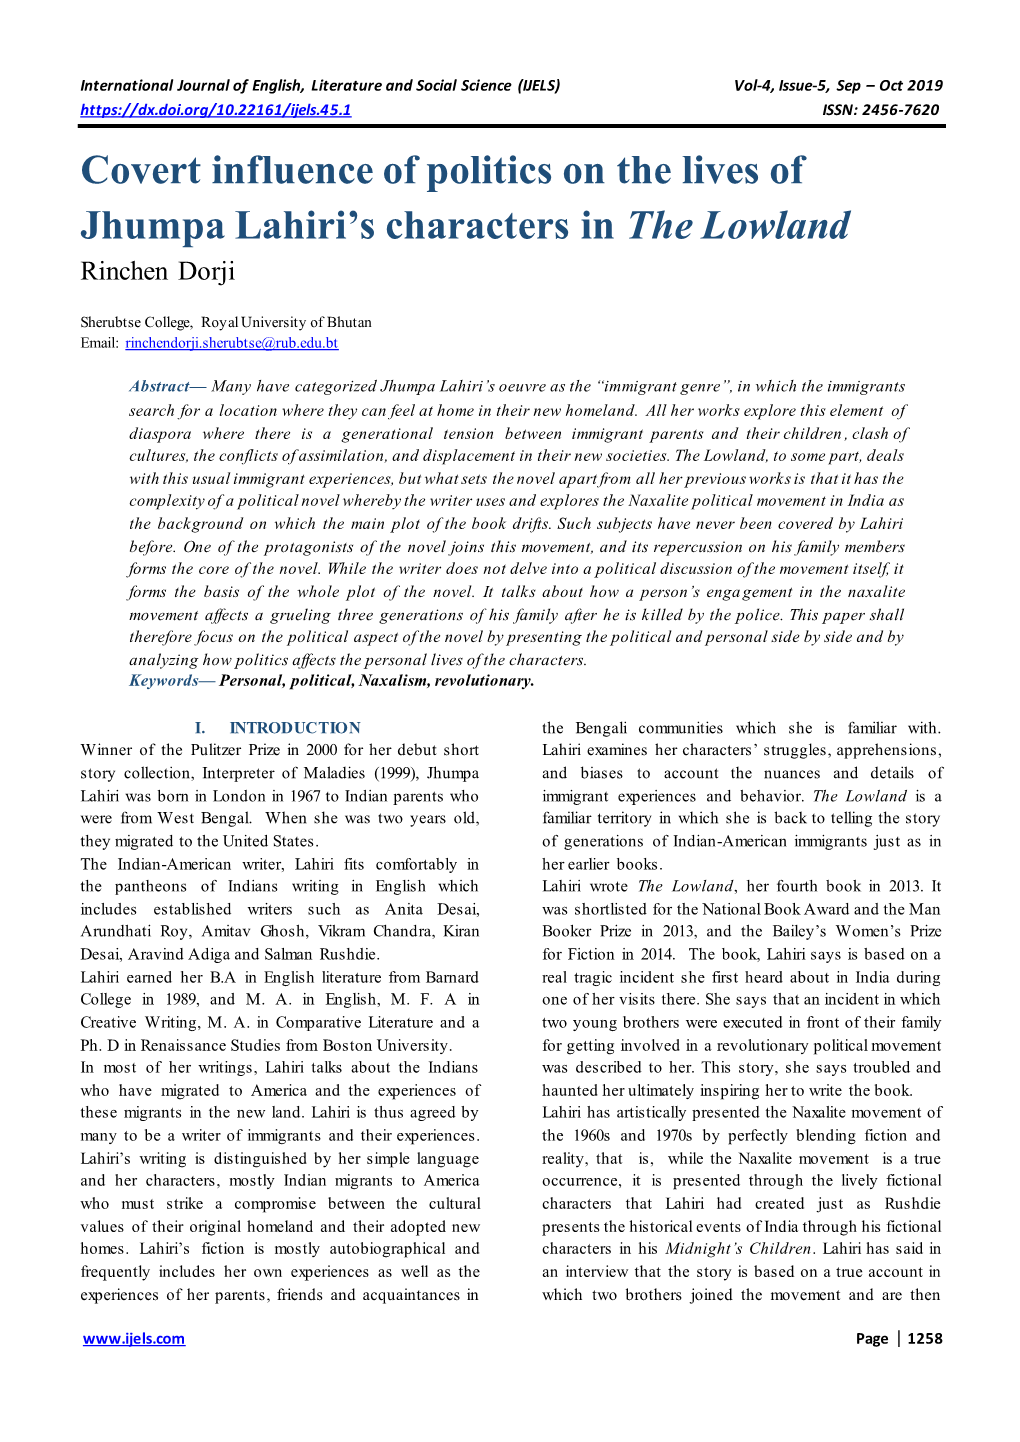 Covert Influence of Politics on the Lives of Jhumpa Lahiri's Characters In